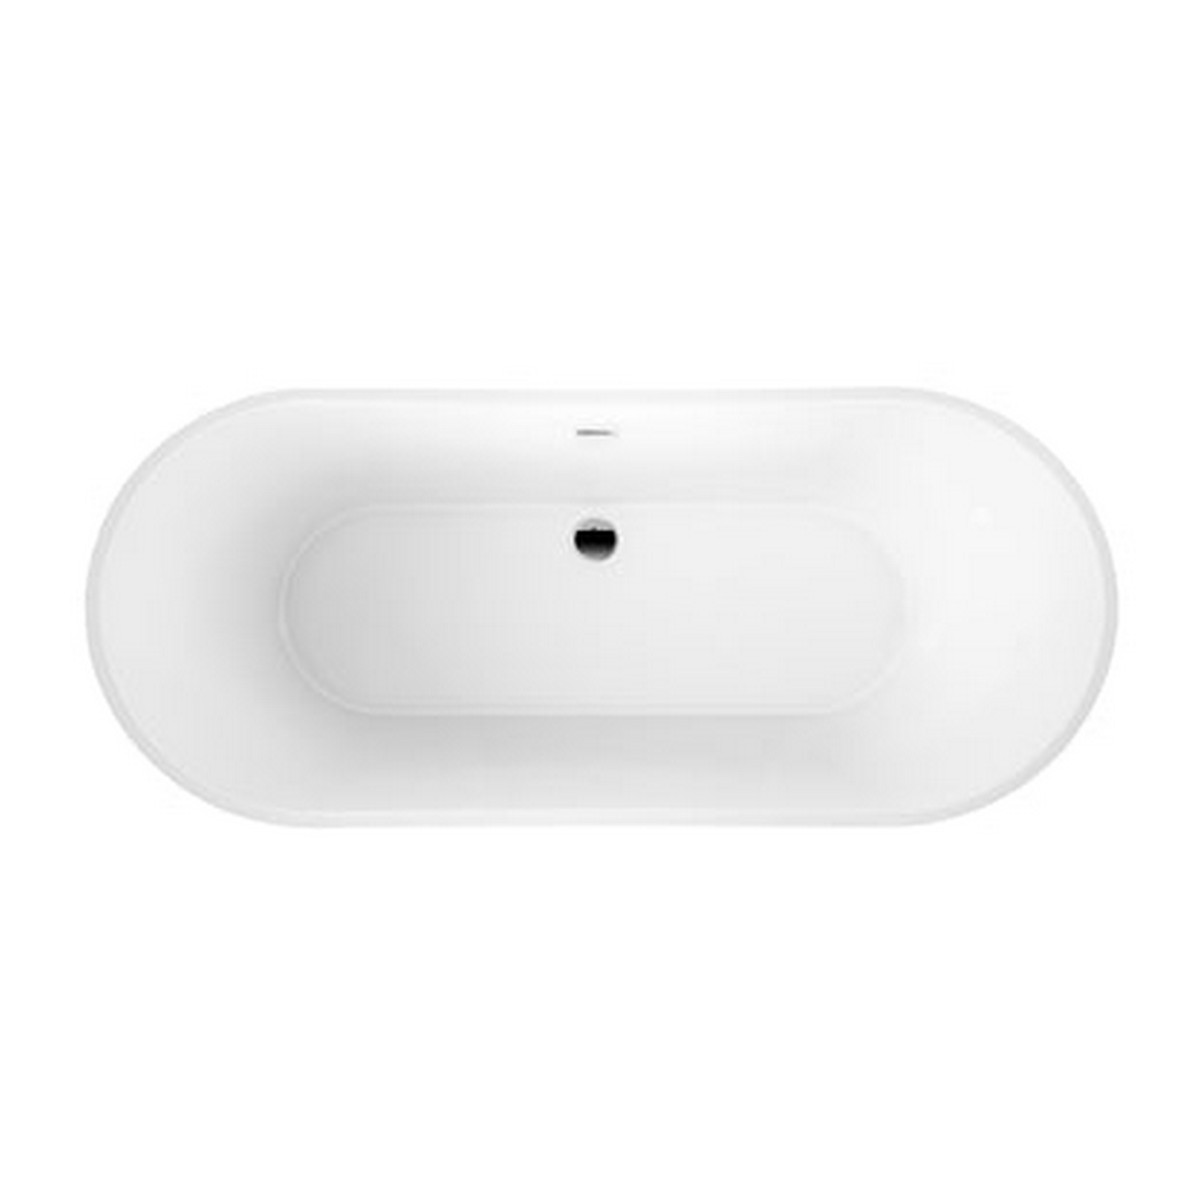 BARCLAY ATDSN69KIG NOREEN 68 5/8 INCH ACRYLIC FREESTANDING OVAL SOAKING DOUBLE SLIPPER BATHTUB IN WHITE WITH INTEGRAL DRAIN AND OVERFLOW